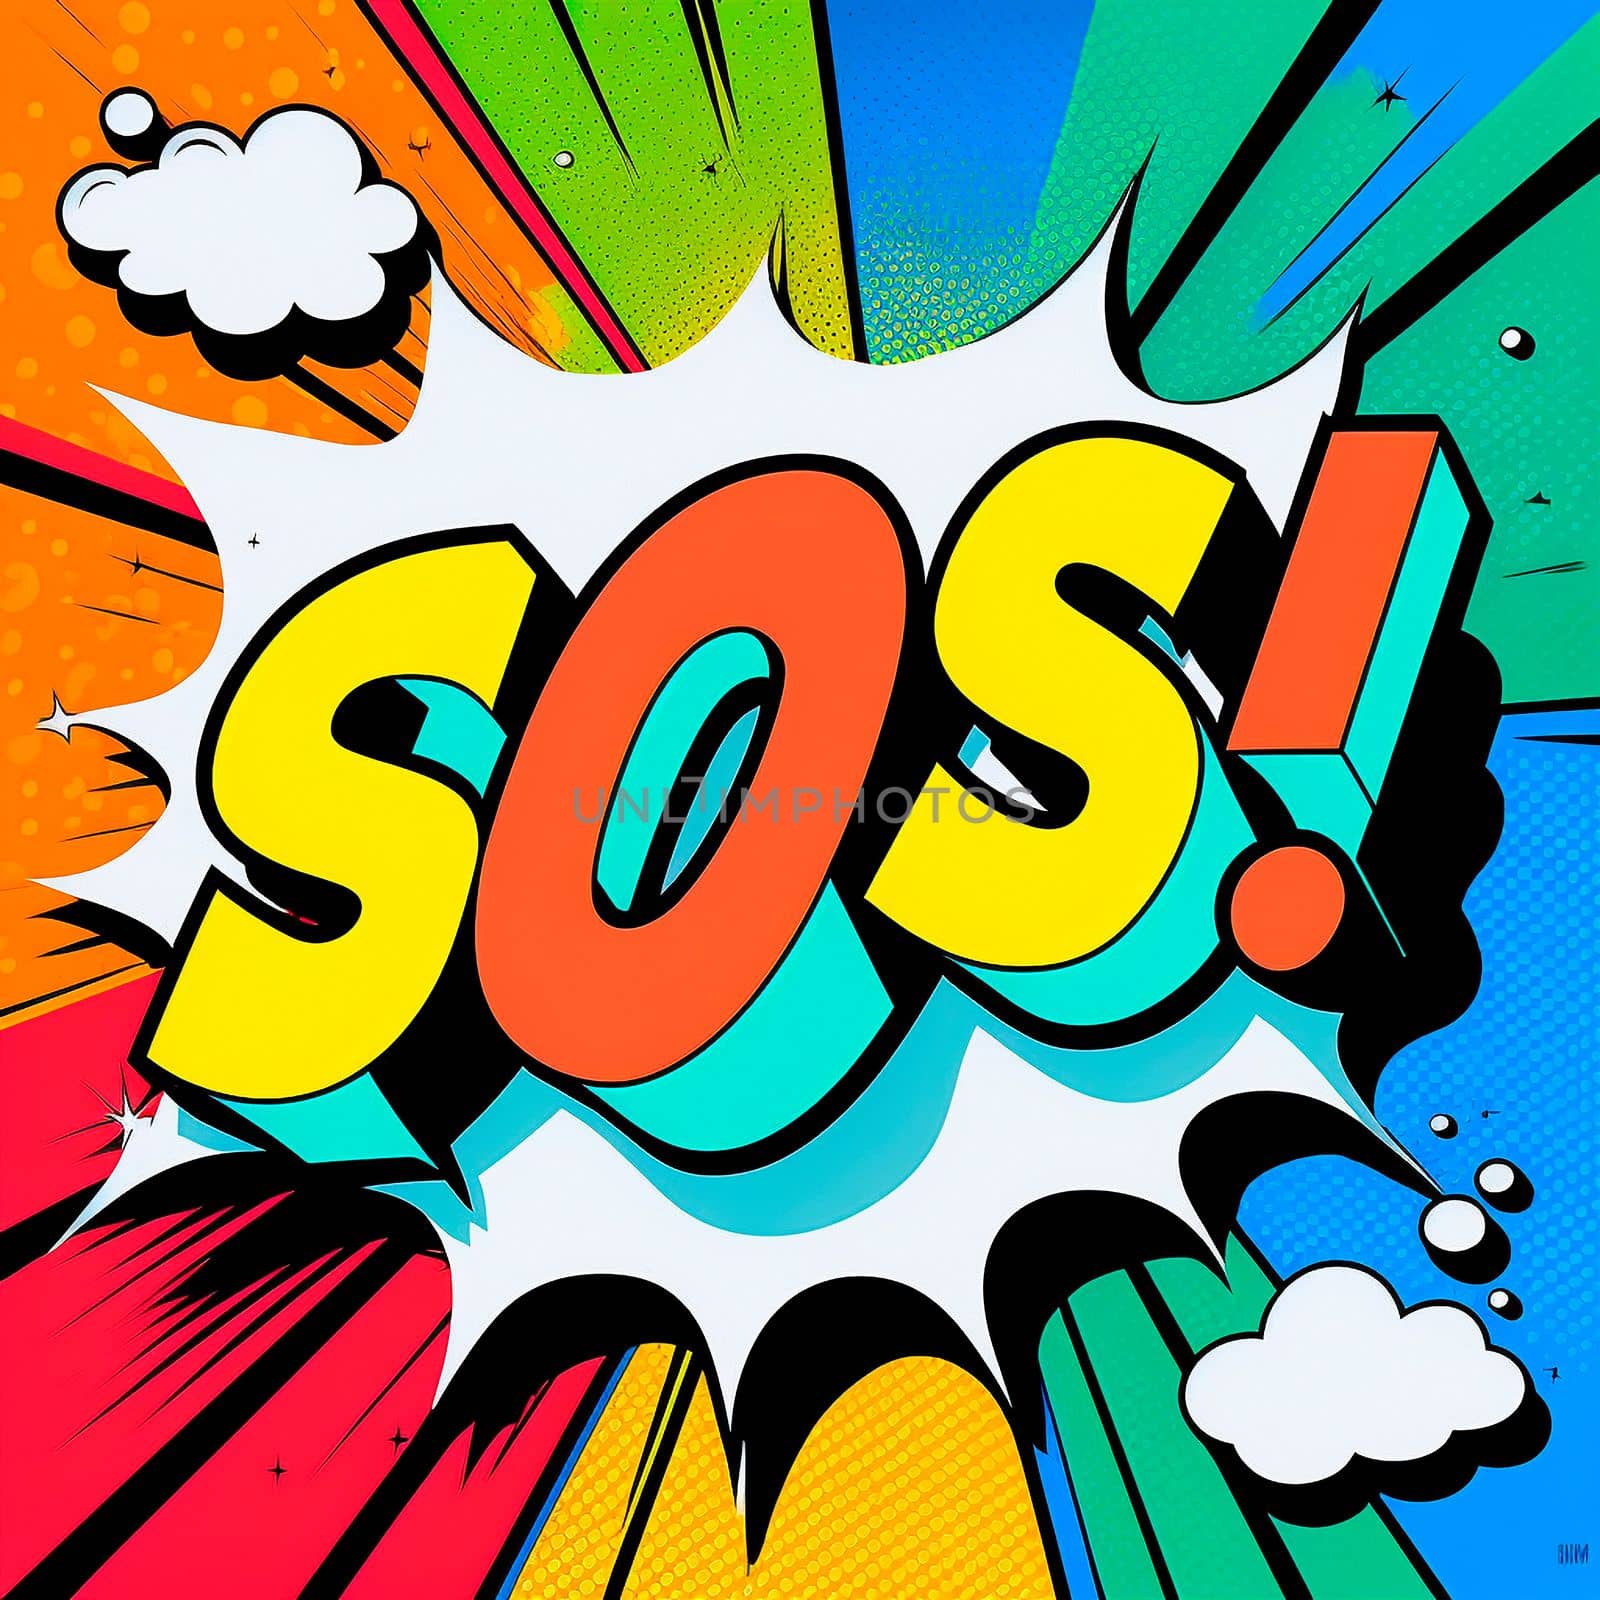 Cartoon sign of burst clouds with the word SOS by NeuroSky